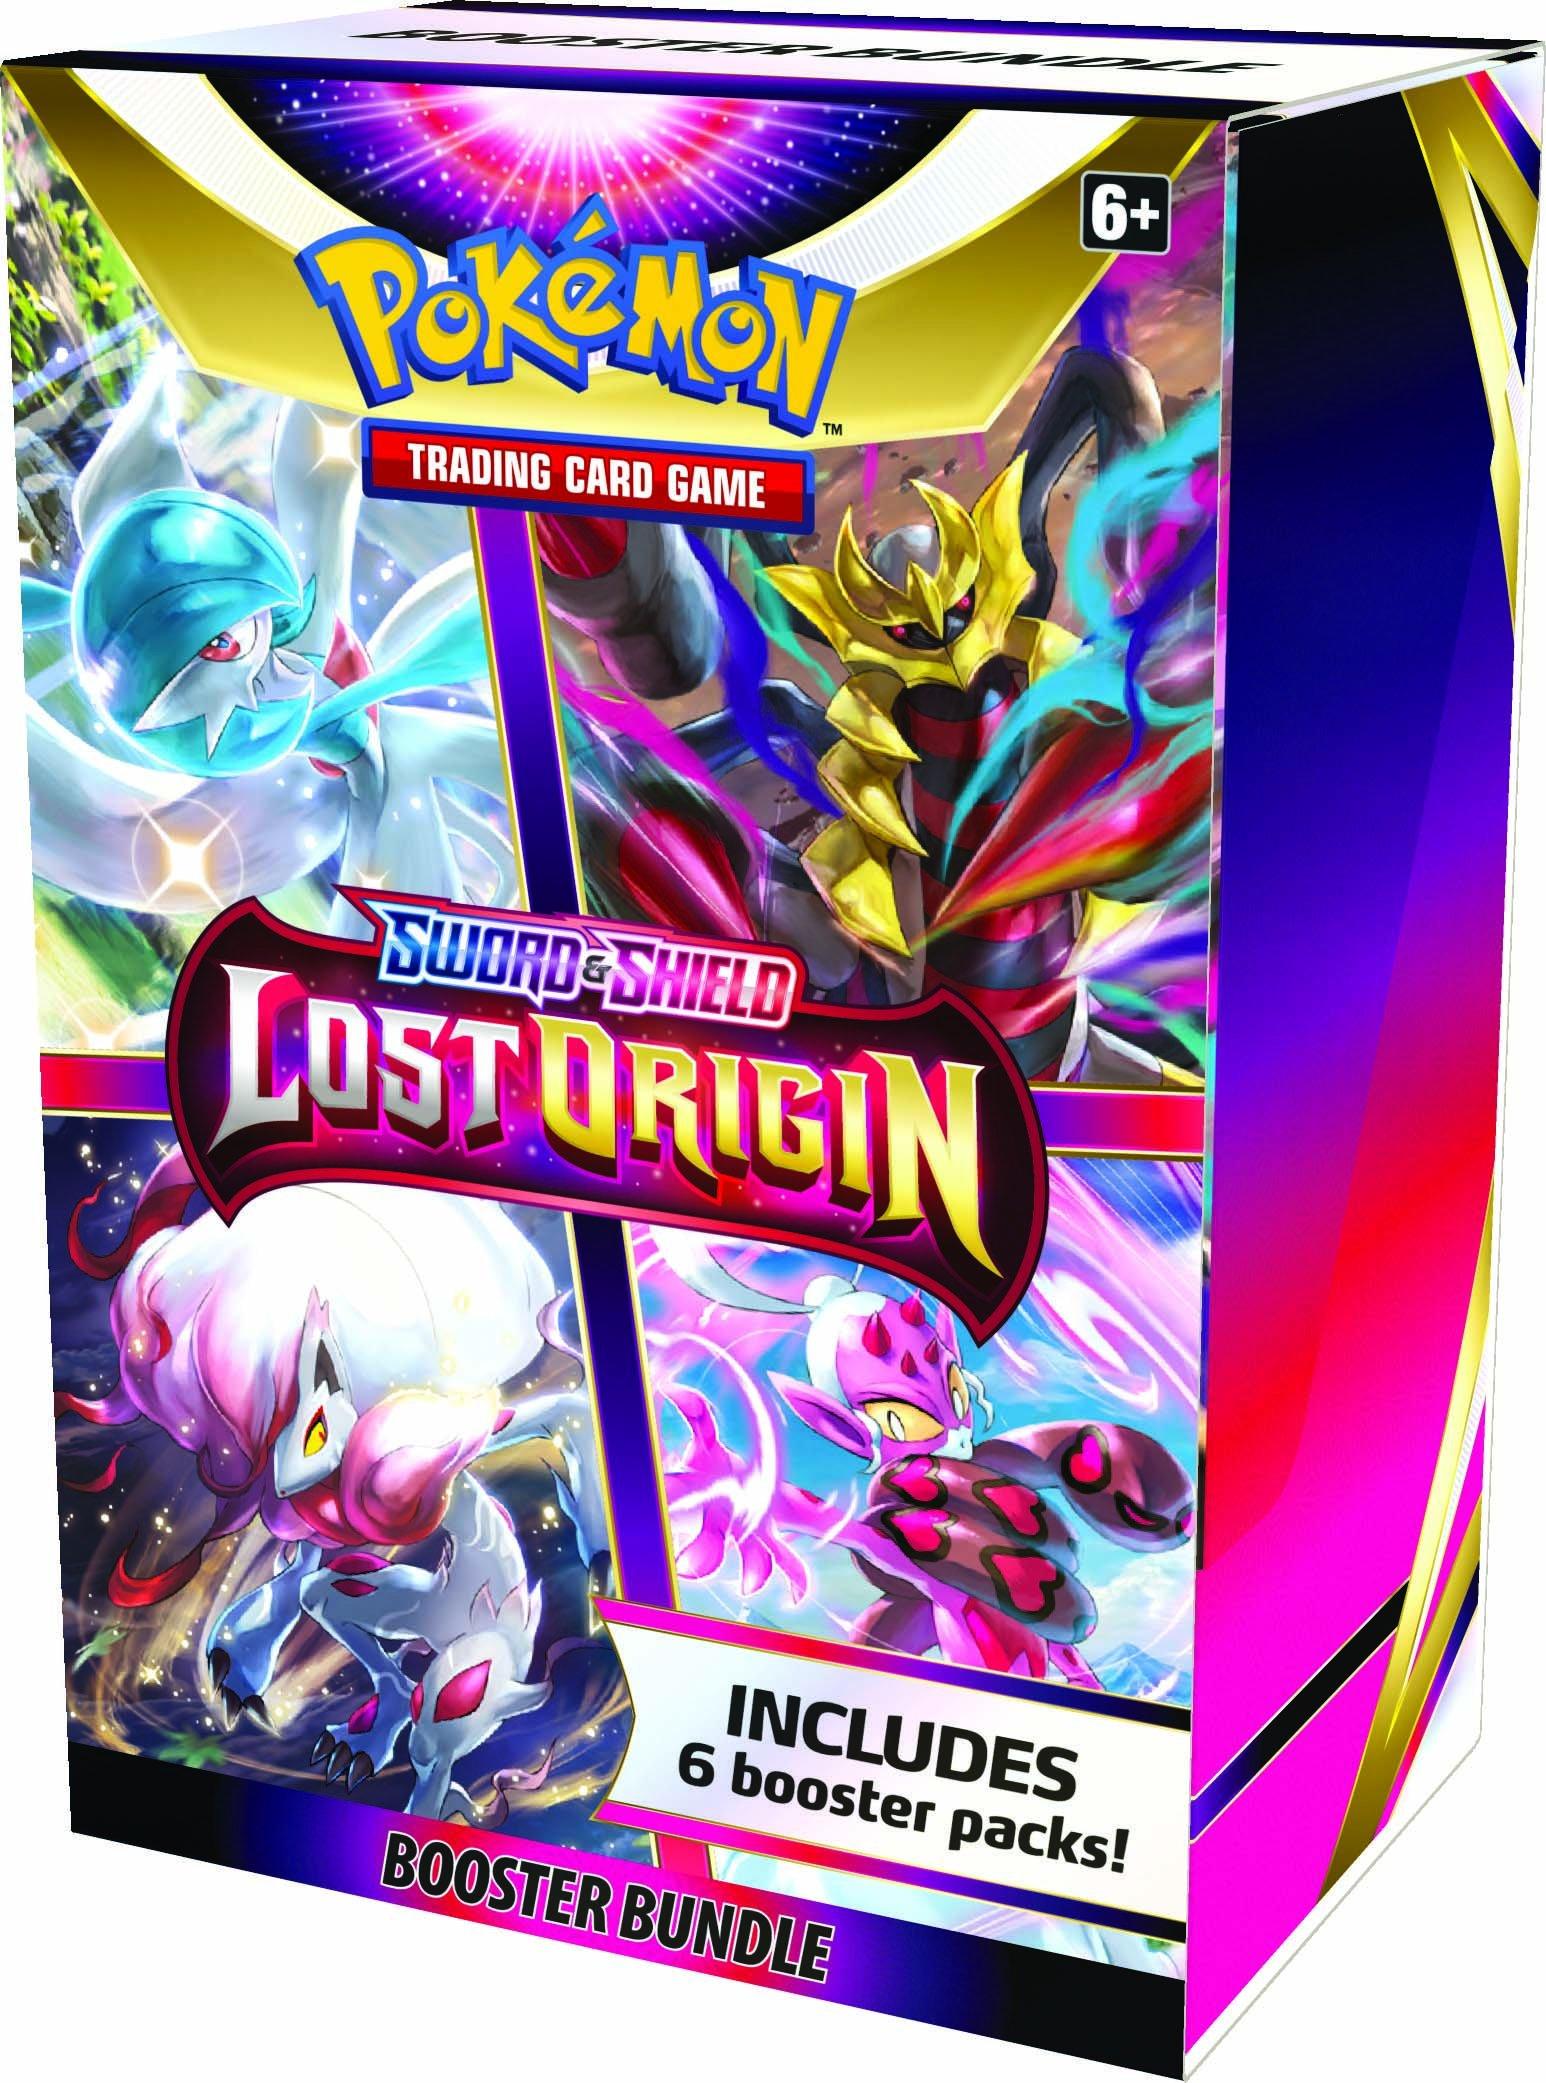 Pokemon Trading Card Game Lost Origin Booster Bundle - Includes 6 Packs